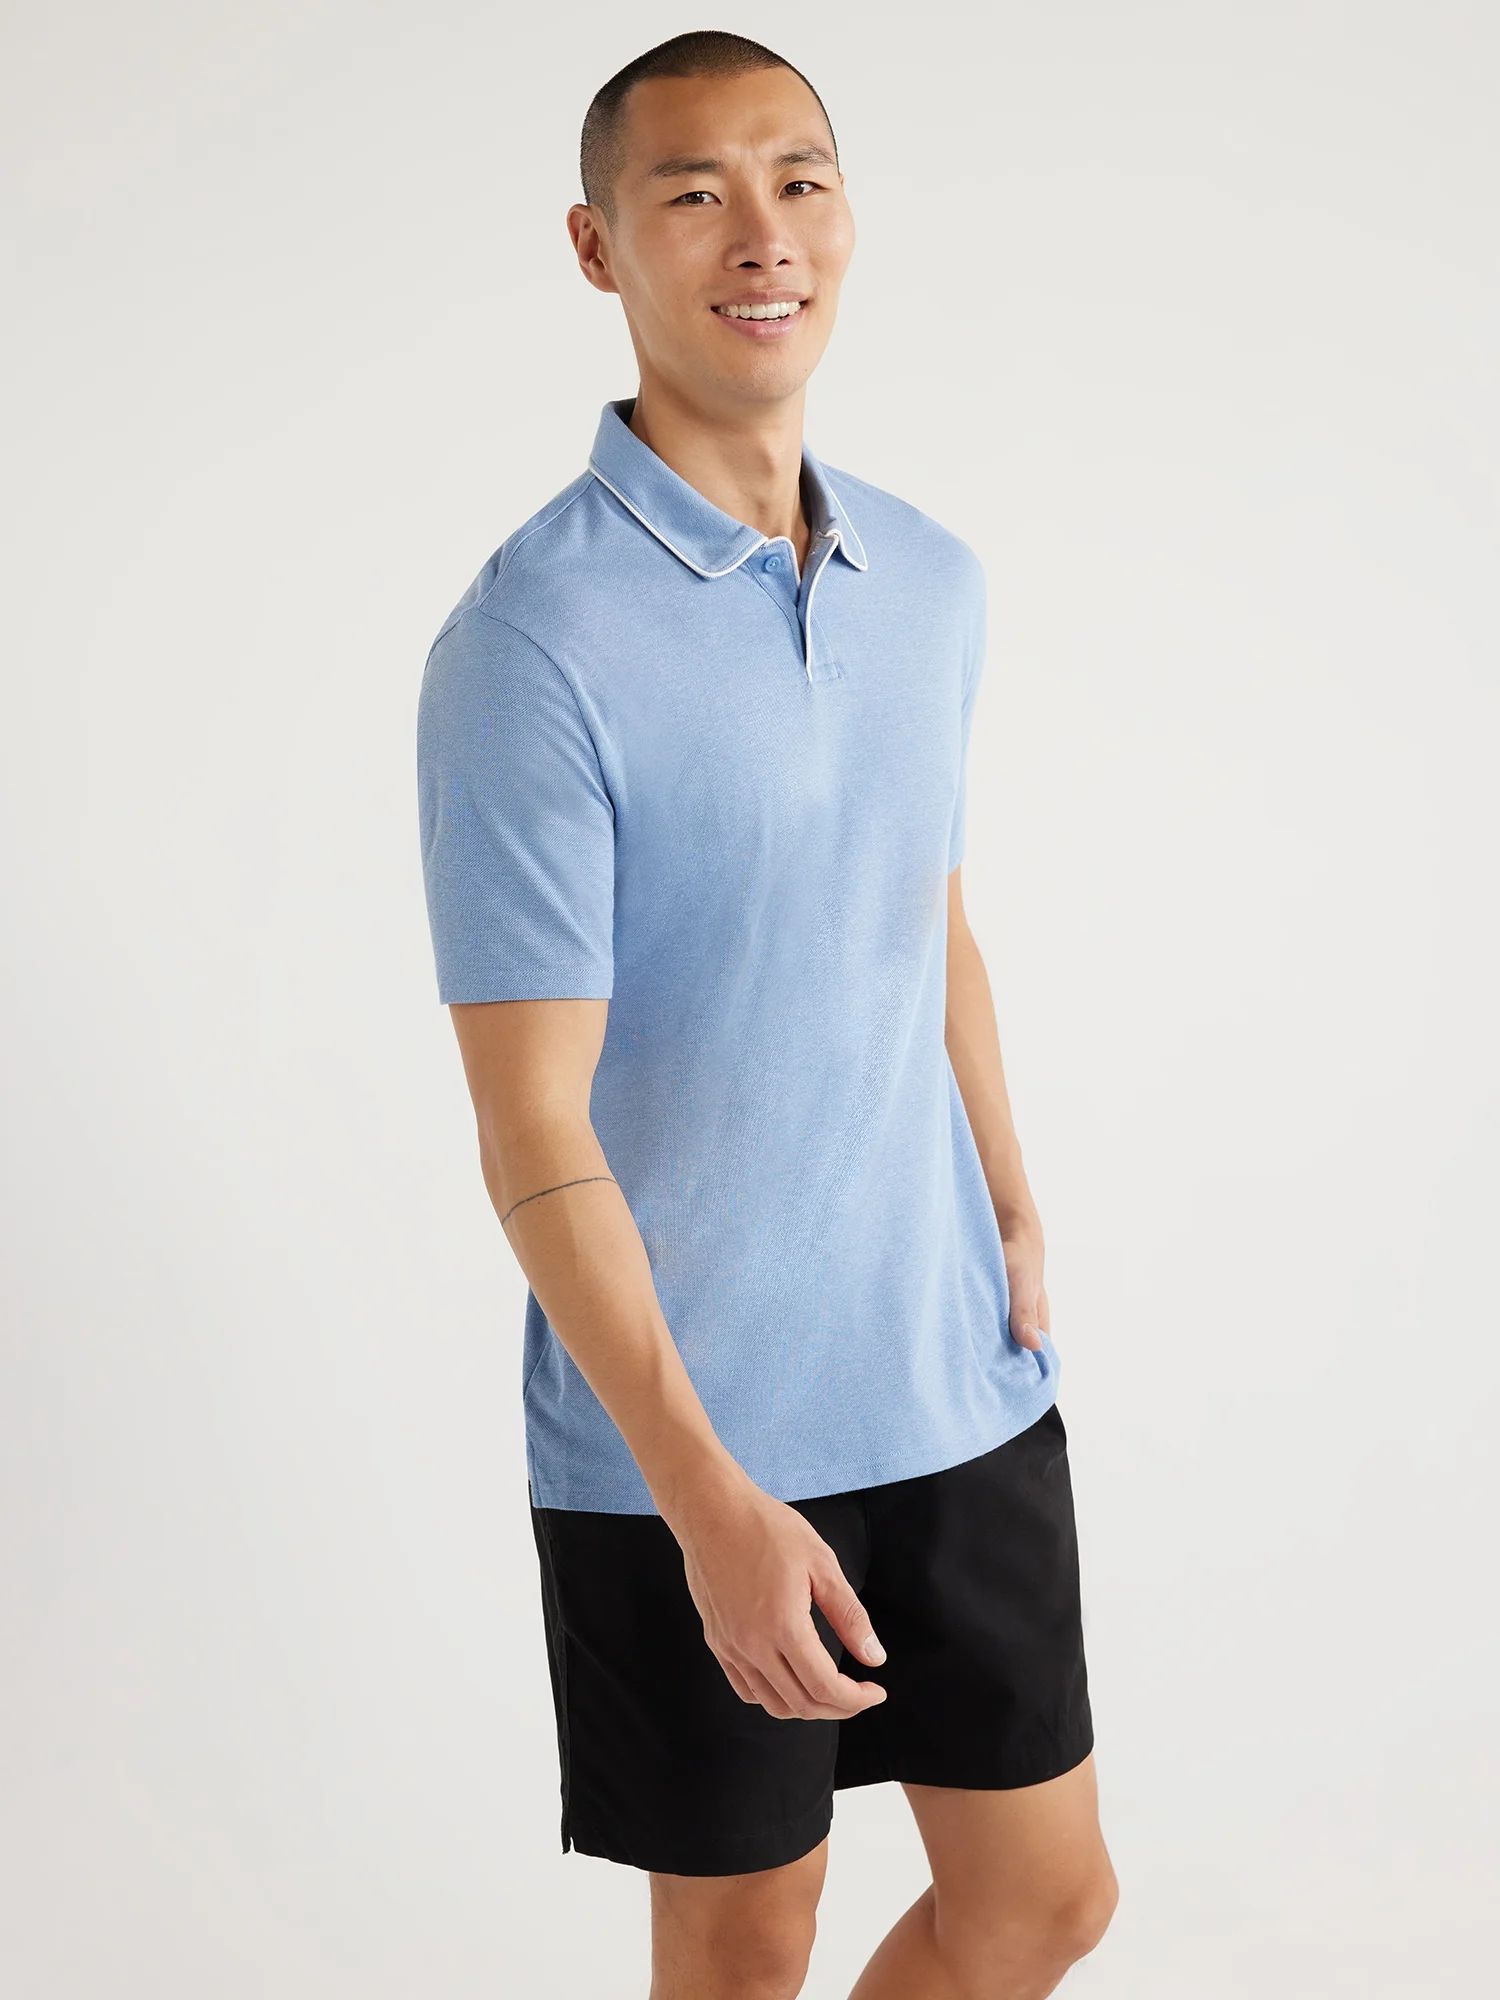 Free Assembly Men's Taped Oxford Pique Polo Shirt with Short Sleeves, Sizes S-3XL | Walmart (US)